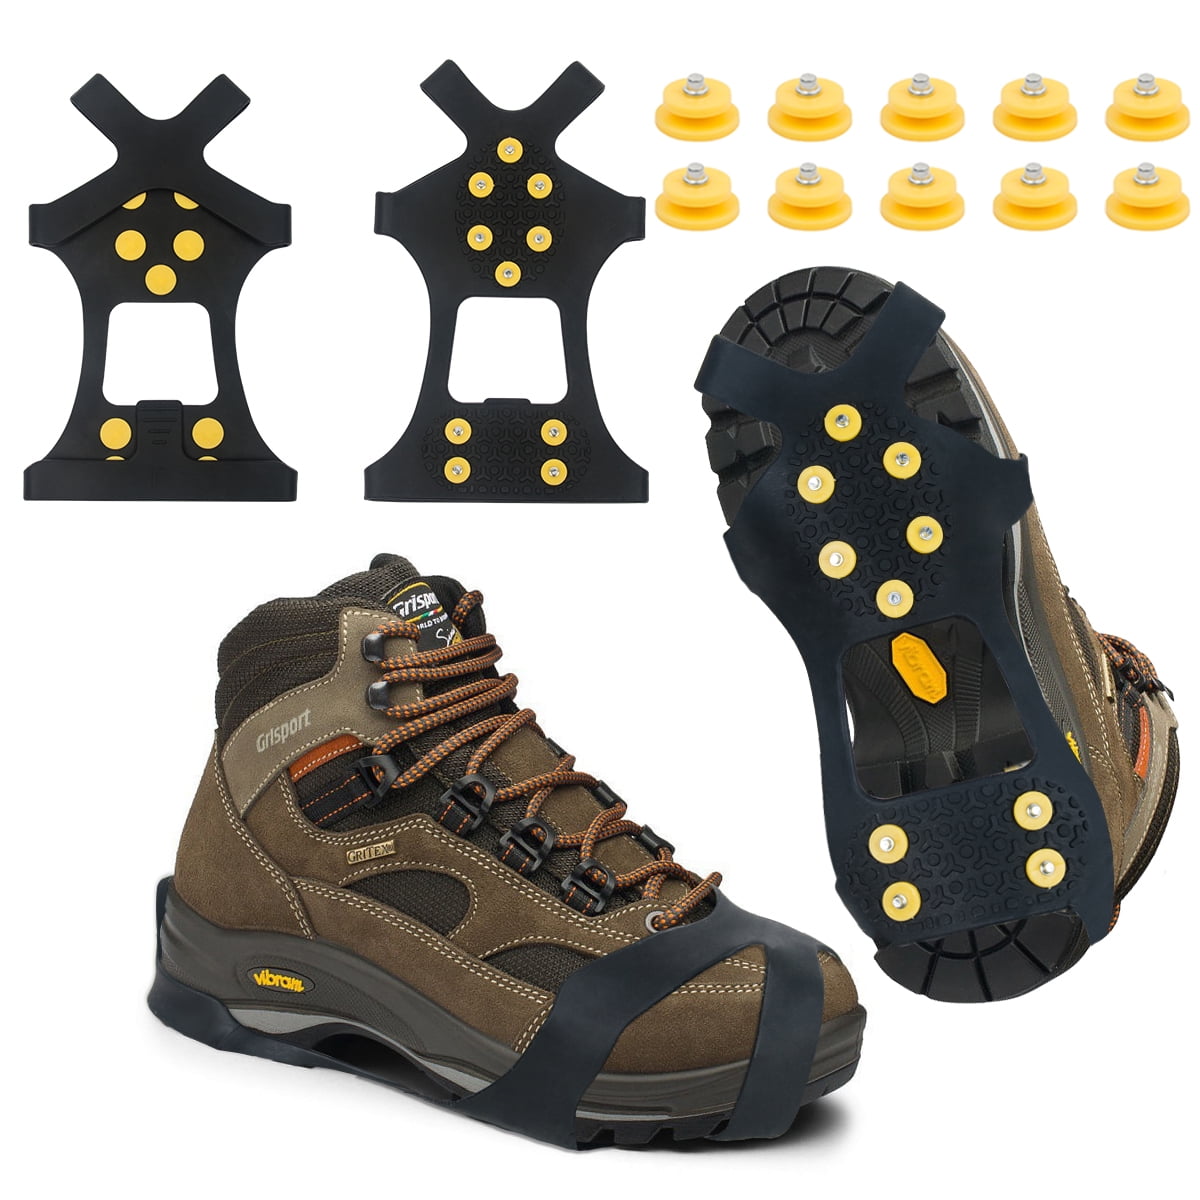 Hiking 10 Teeth Anti Slip Ice Snow Gripper Spike Boot Covers for Shoes shoveling 